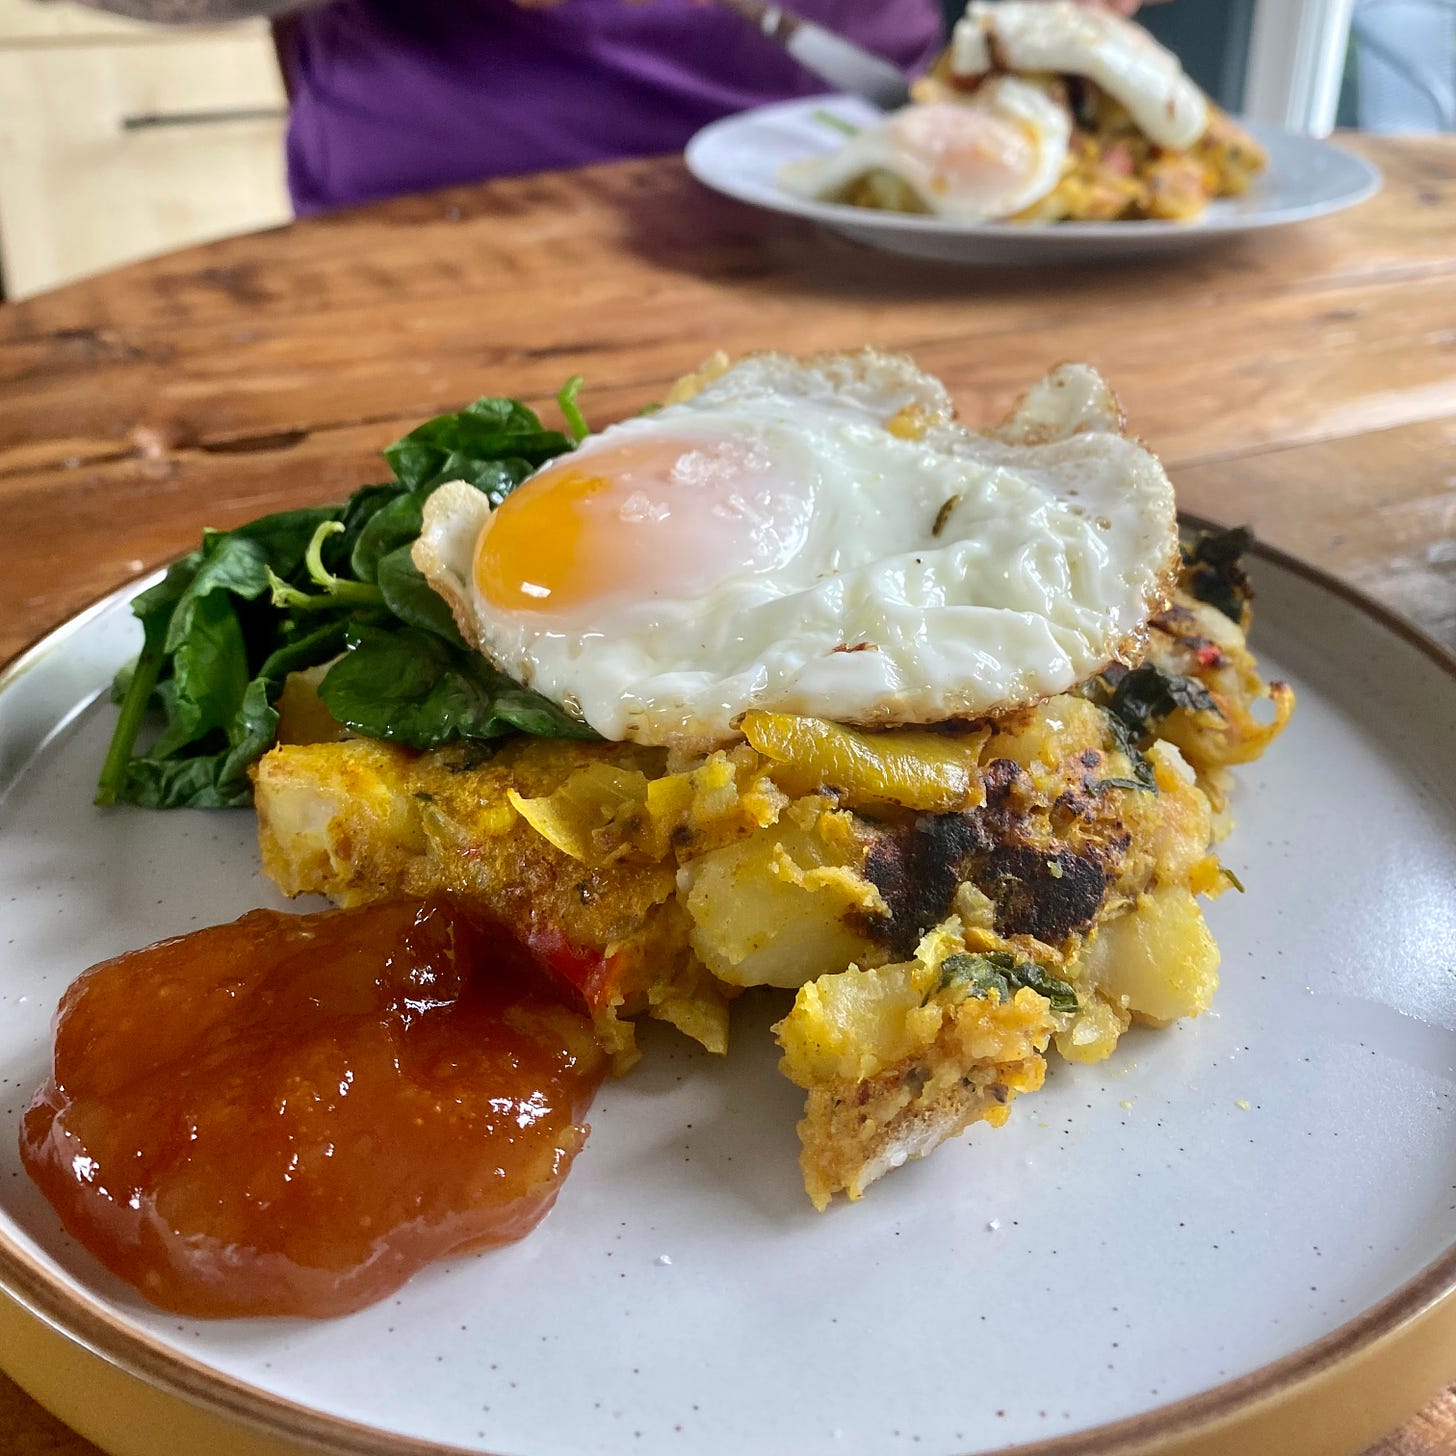 Plate with mango chutney, fried egg, wilted spinach and bubble and squeak made from Bombay potatoes